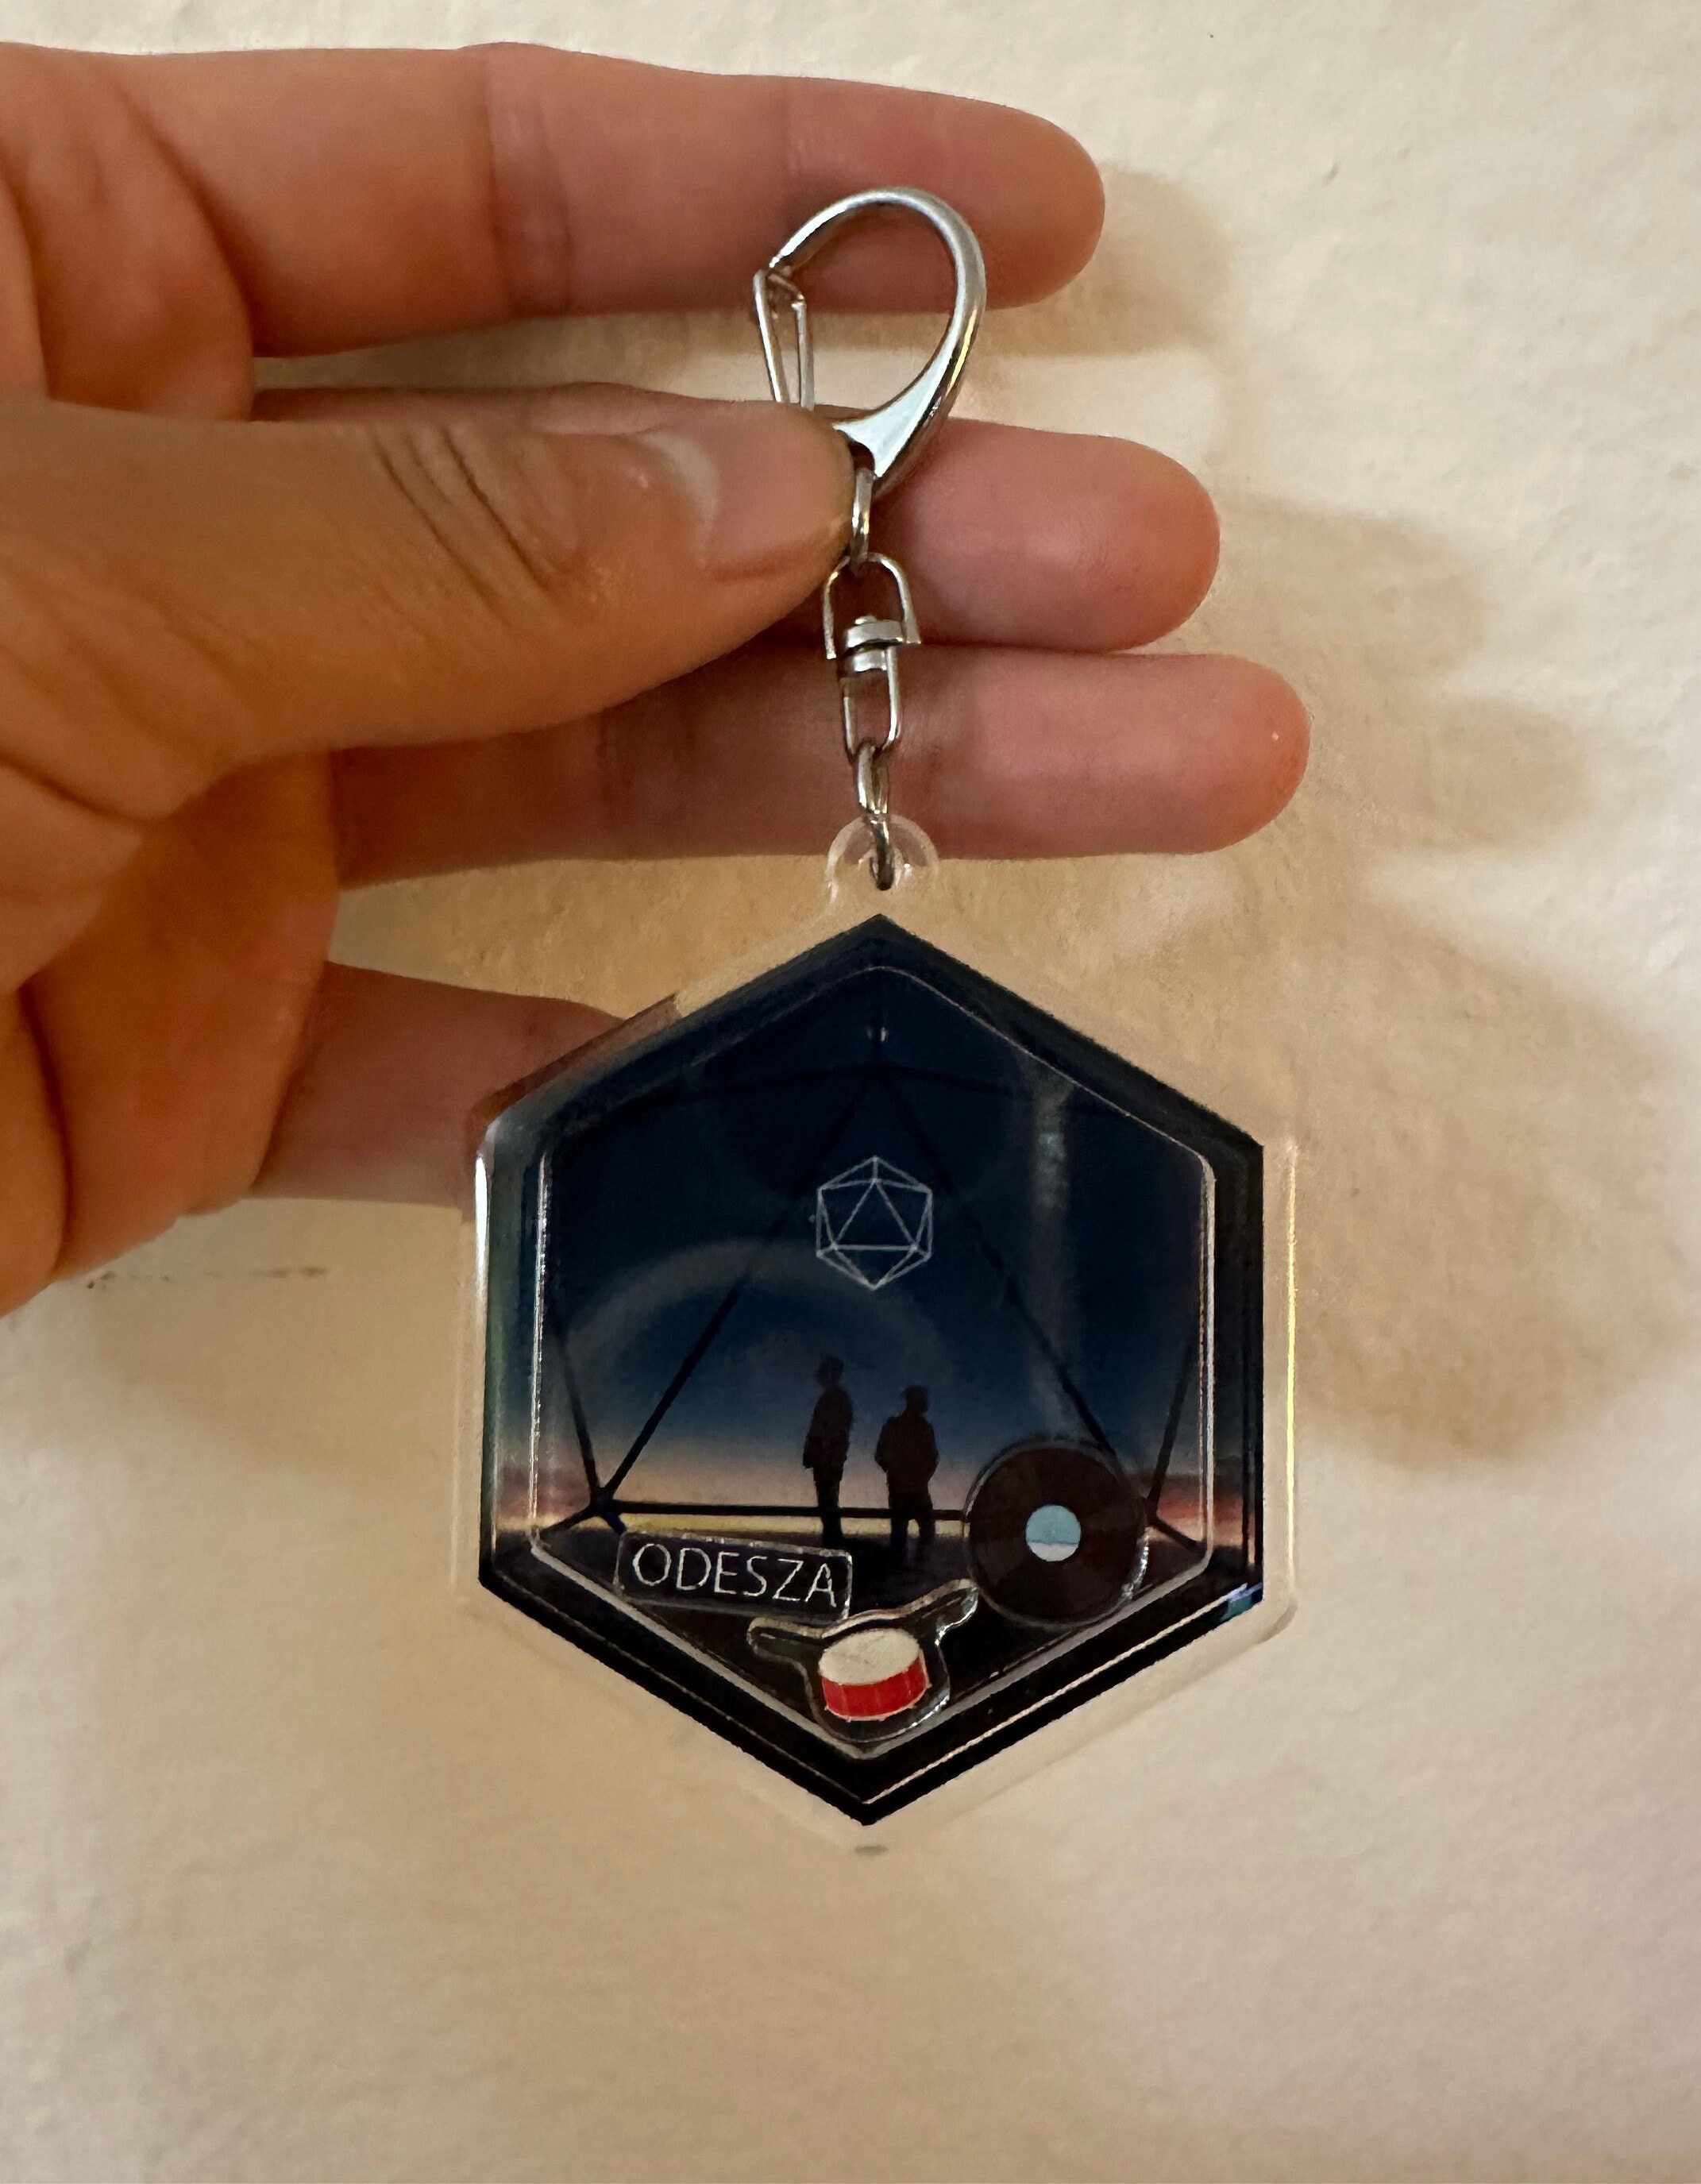 My friend just started selling these custom things! : r/Odesza